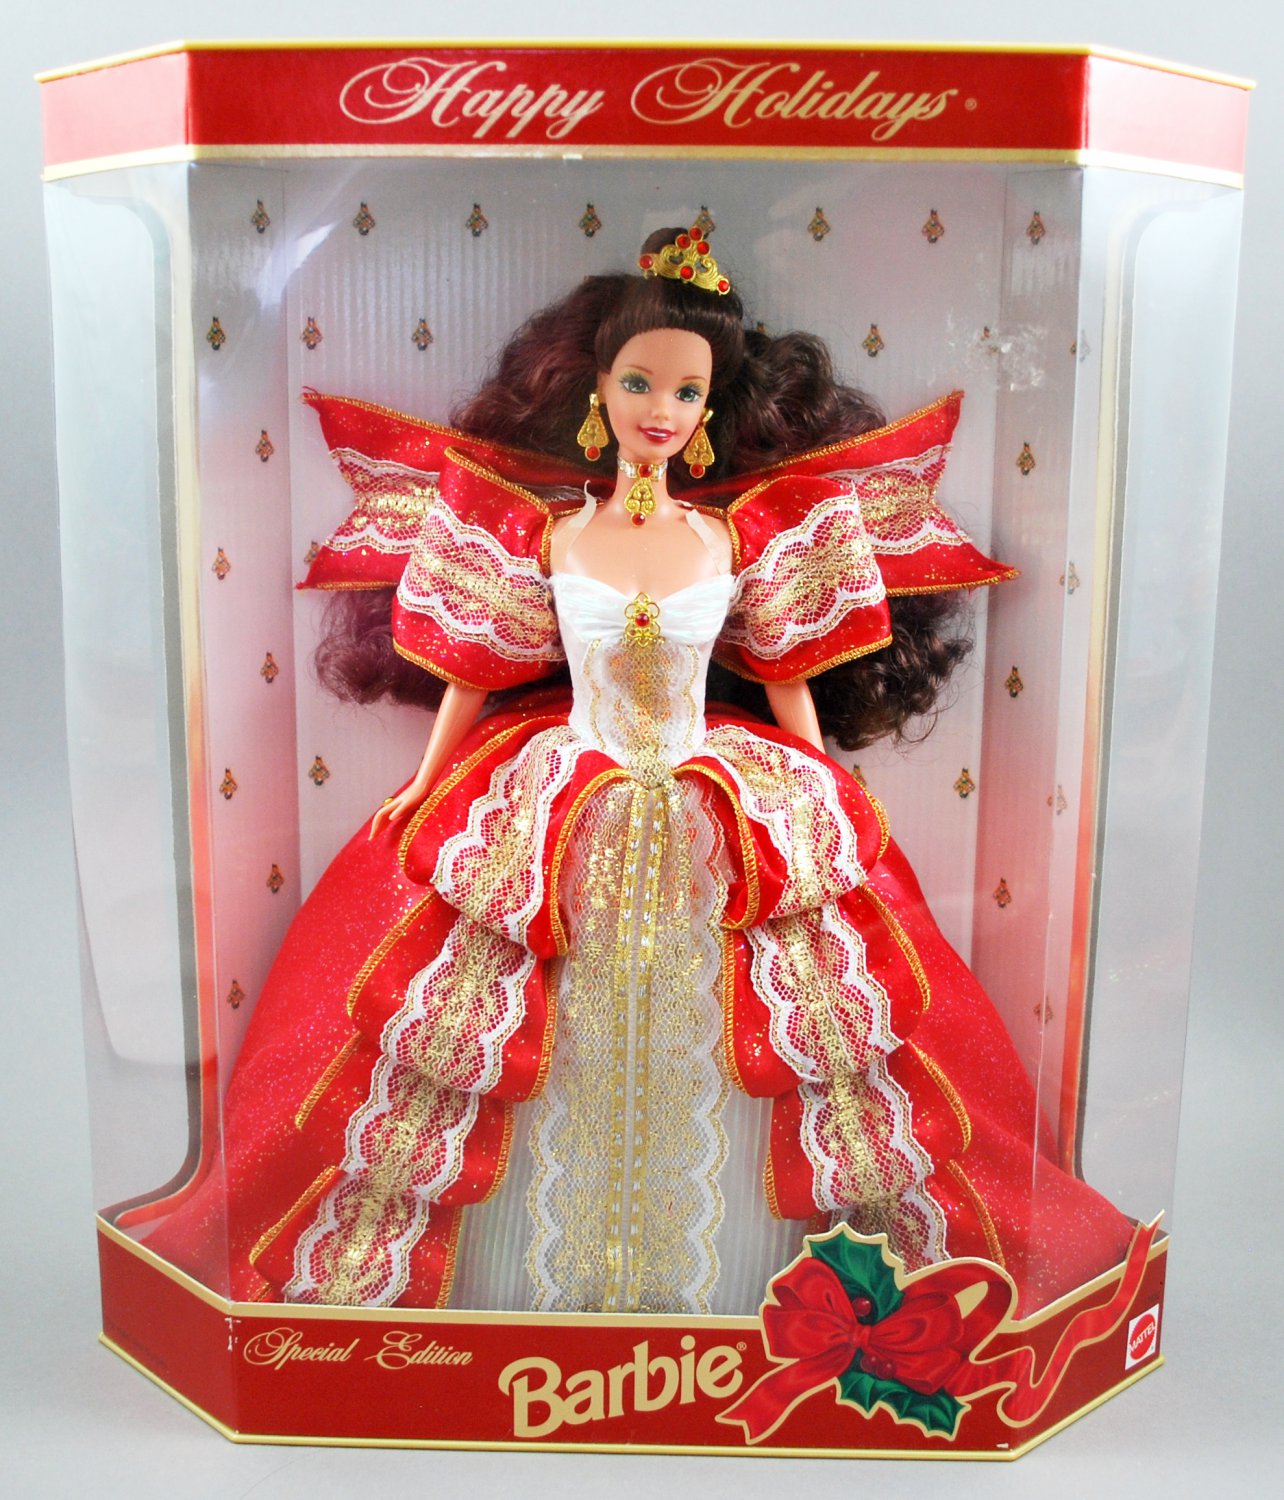 Happy Holidays 1997 Barbie Doll for sale online 